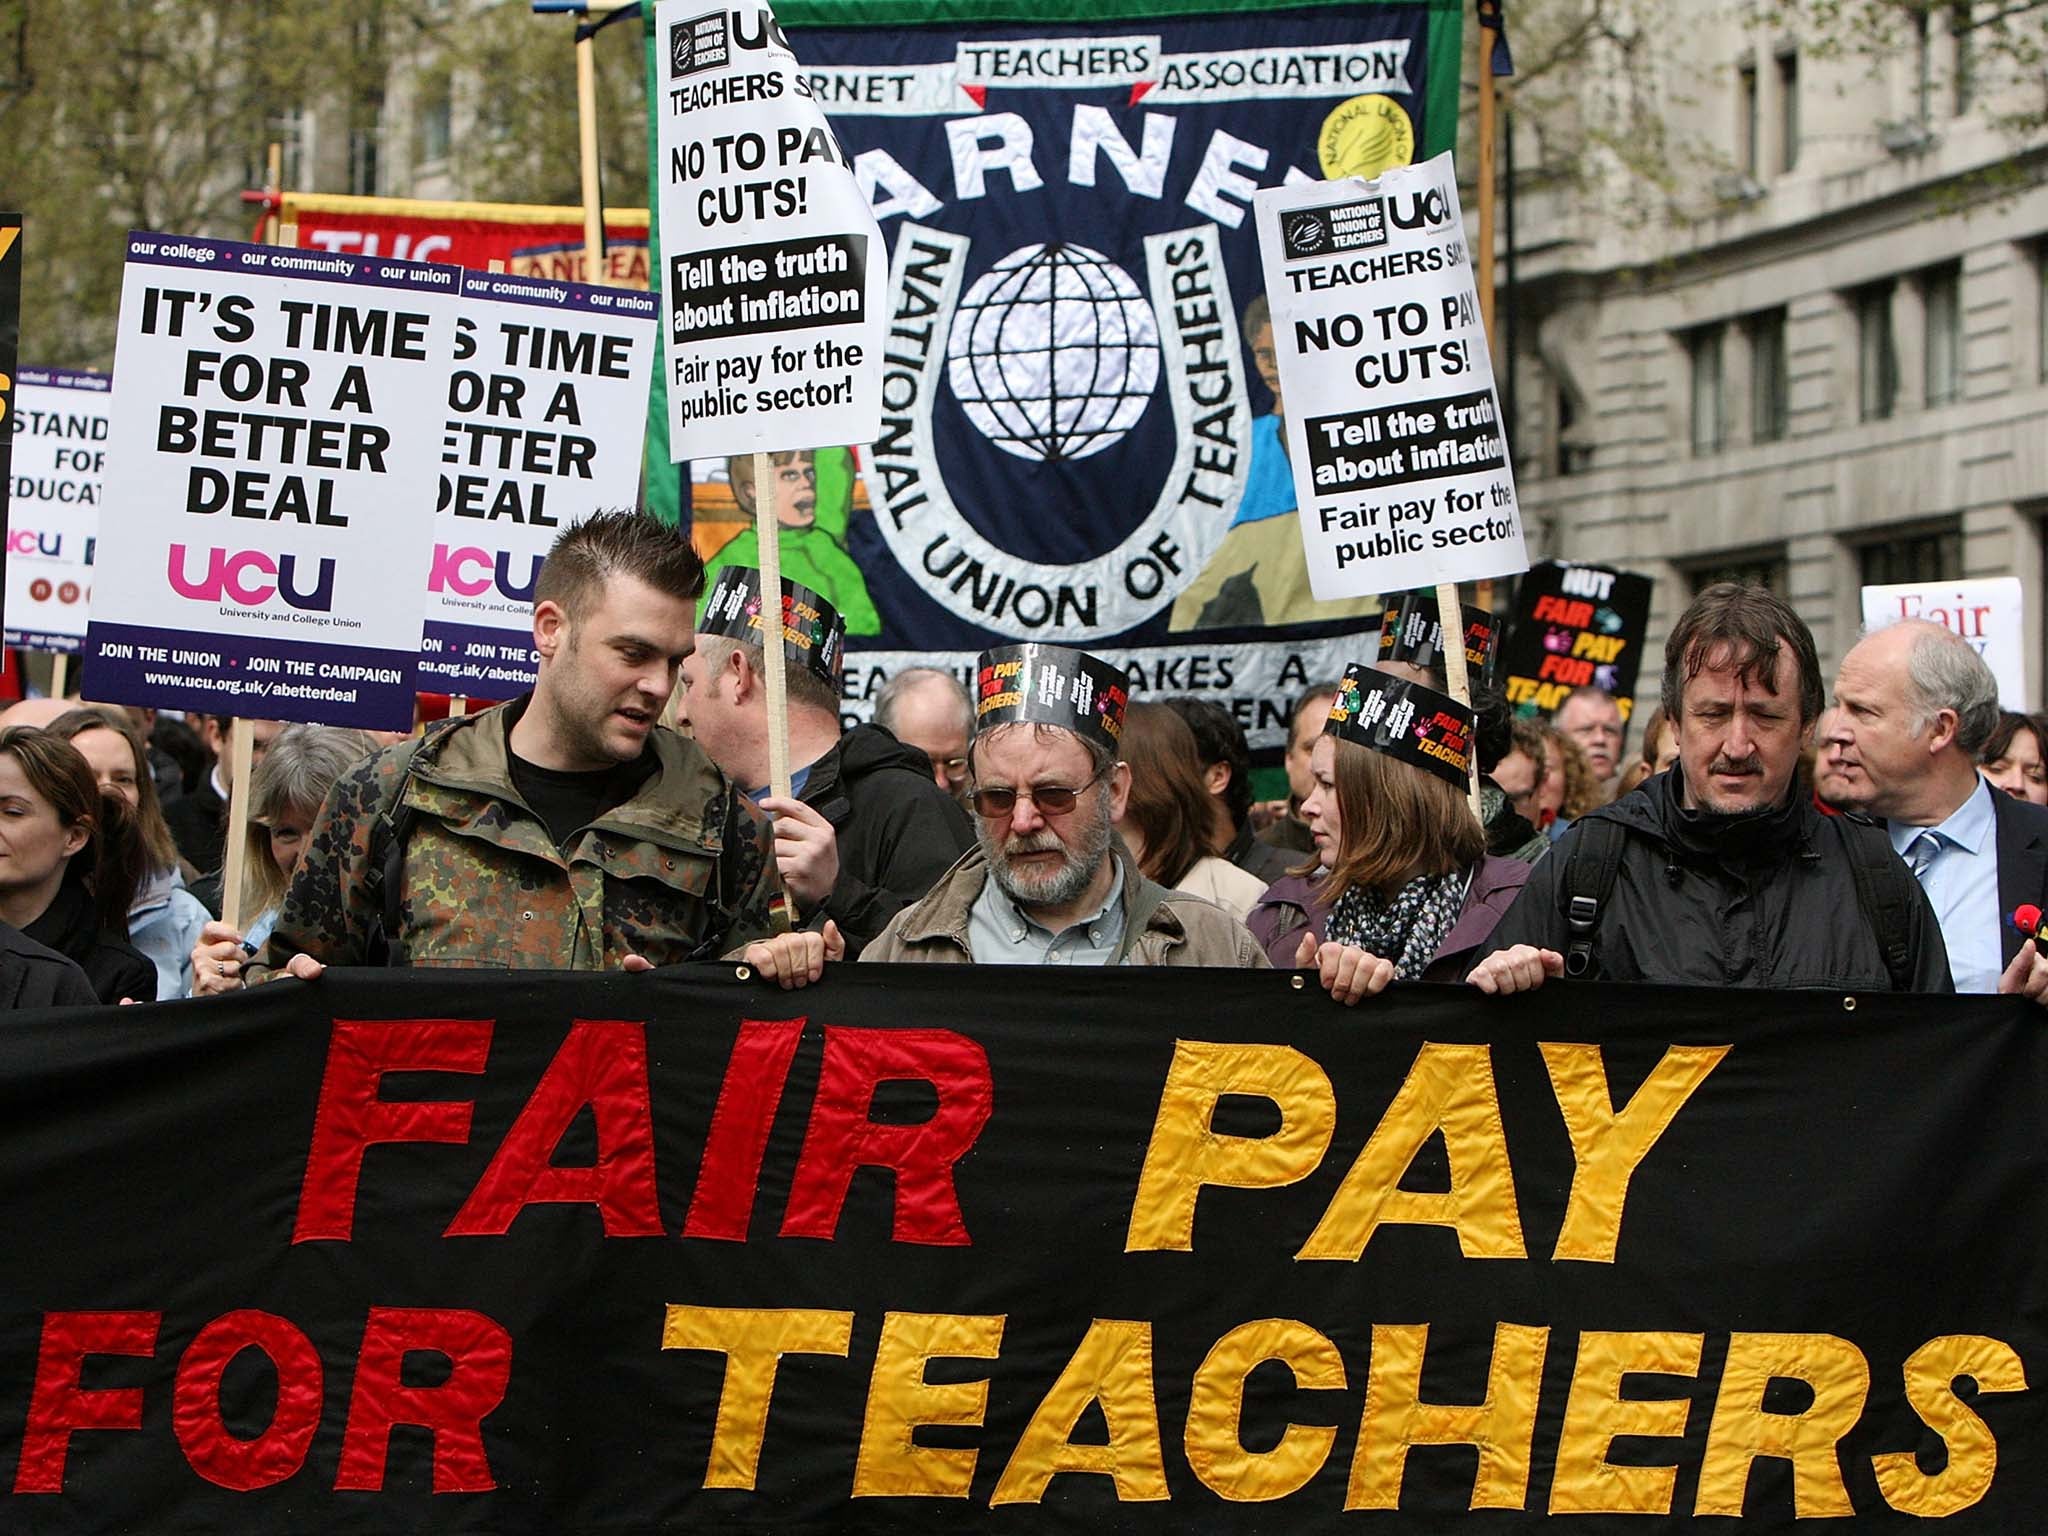 Teachers marching through London during a one day walkout over pay and conditions in 2008